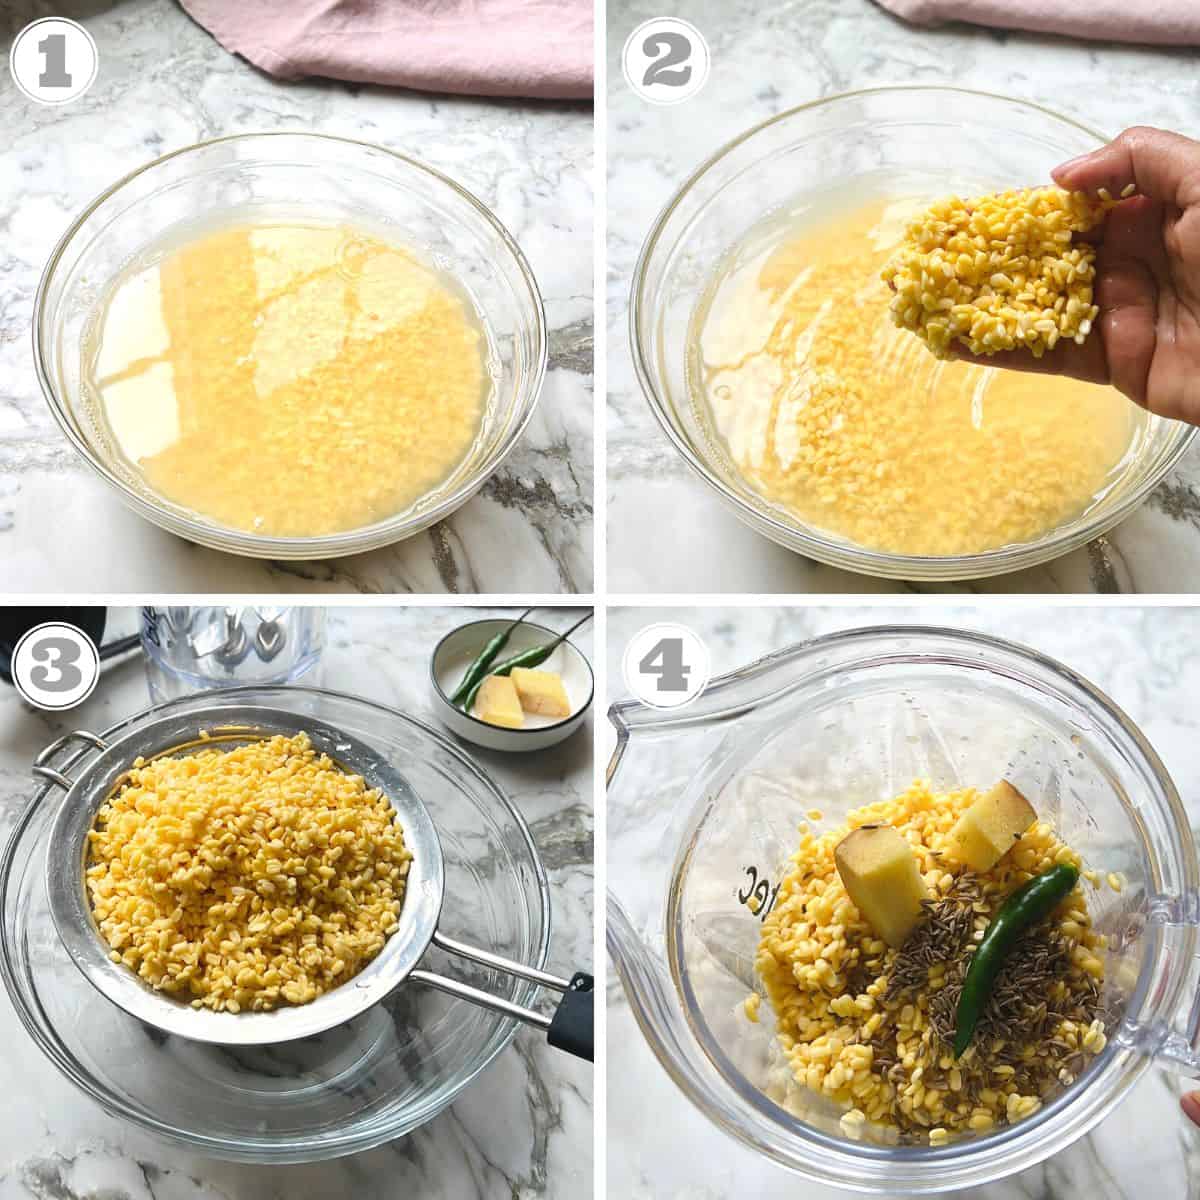 photos one through four showing how to make mug dal chilla batter 